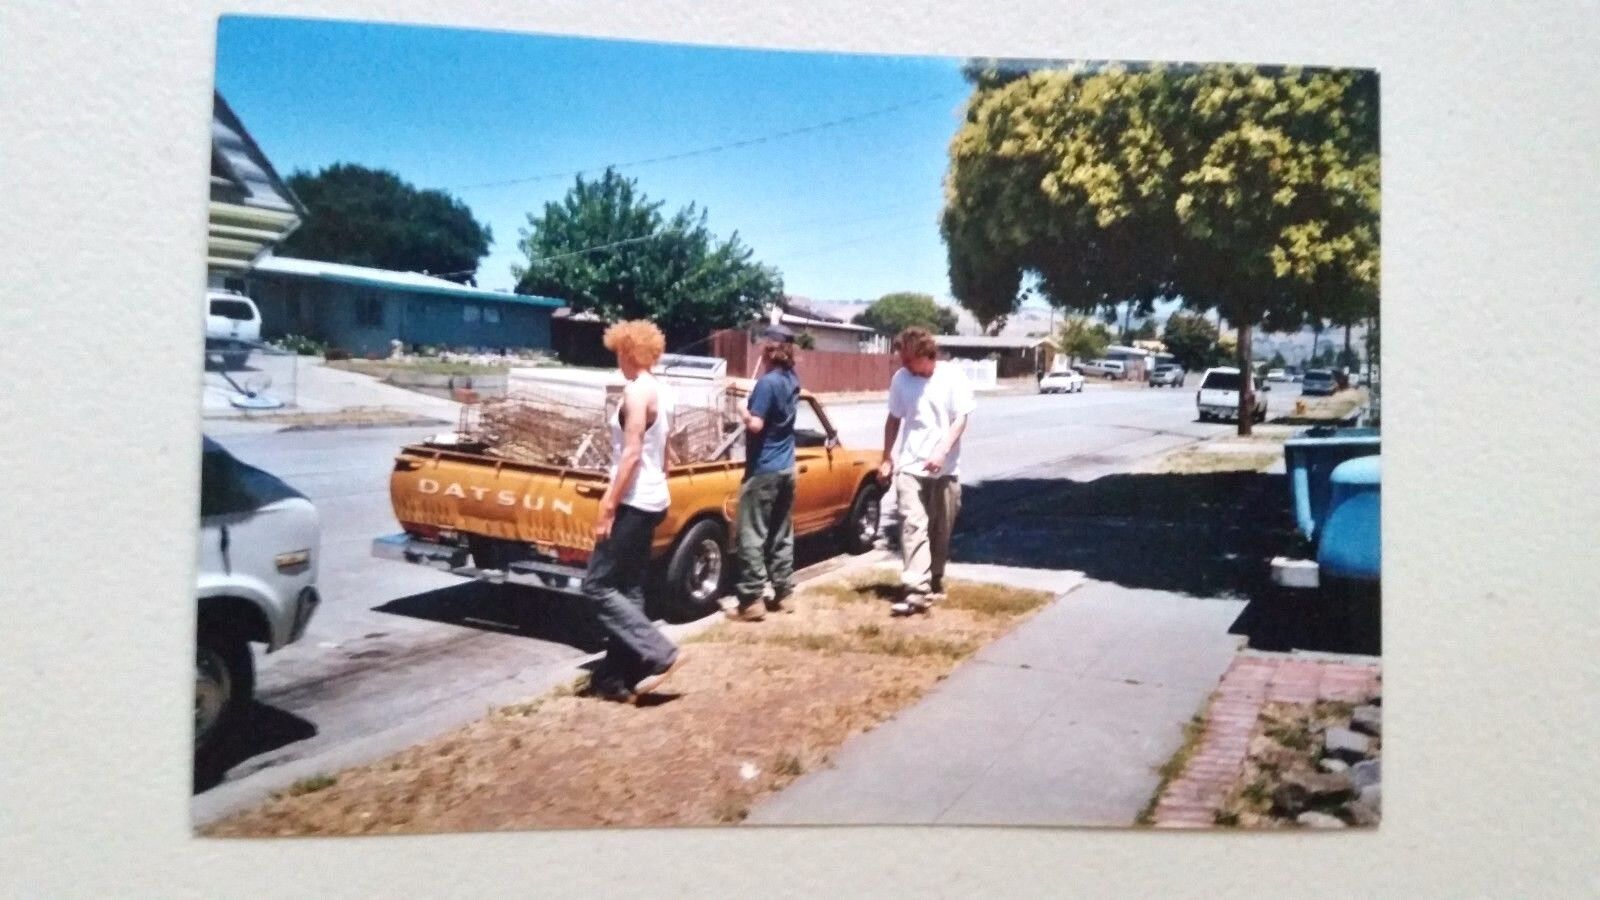 Datsun Pickup Truck Haulers Scrap Metal Recycling Red Hair Picture Photo 2000s